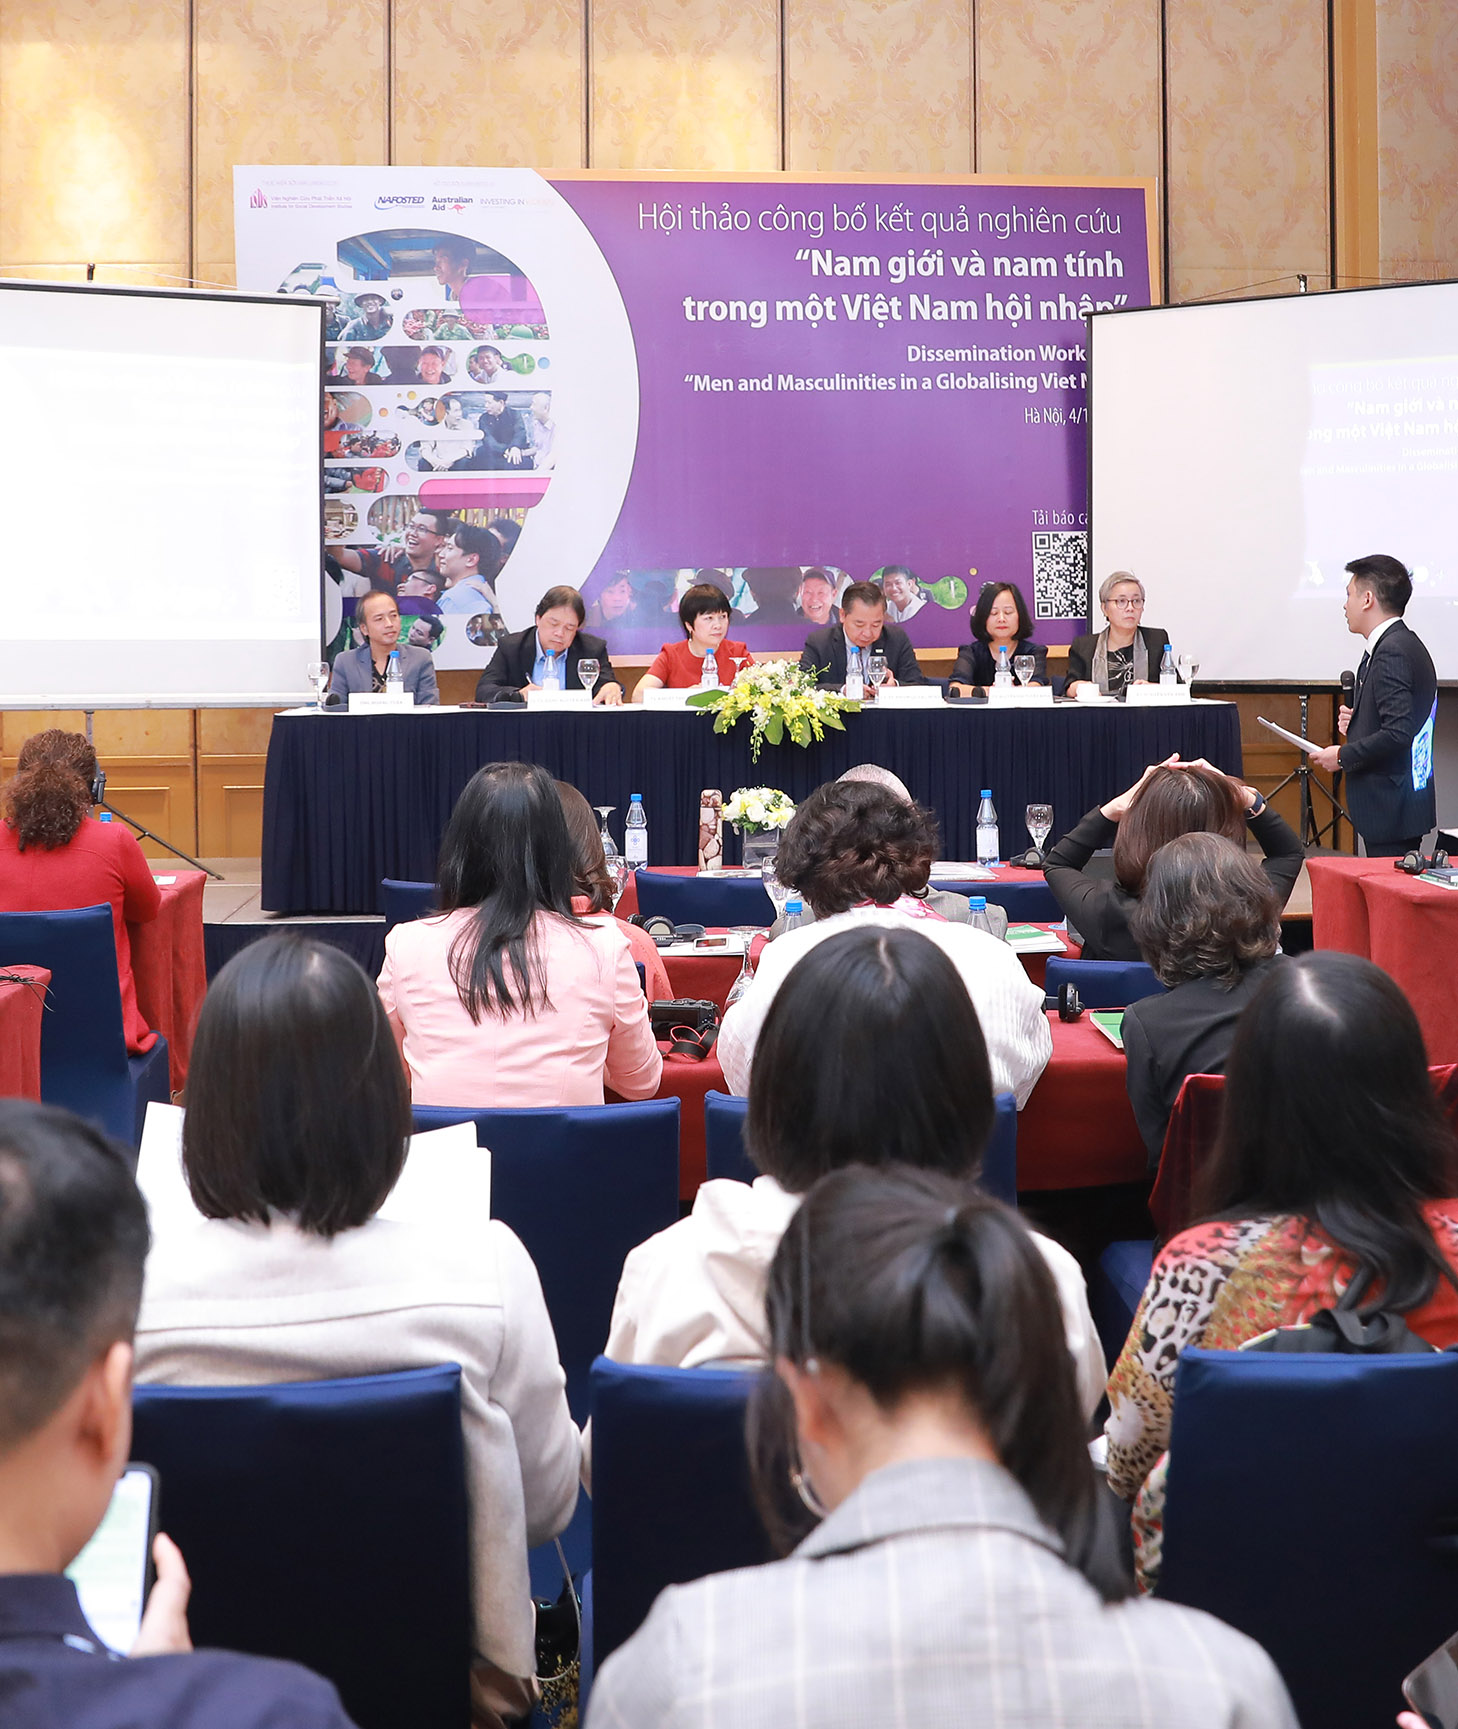 Dissemination Workshop “Men and Masculinities in a Globalising Viet Nam”